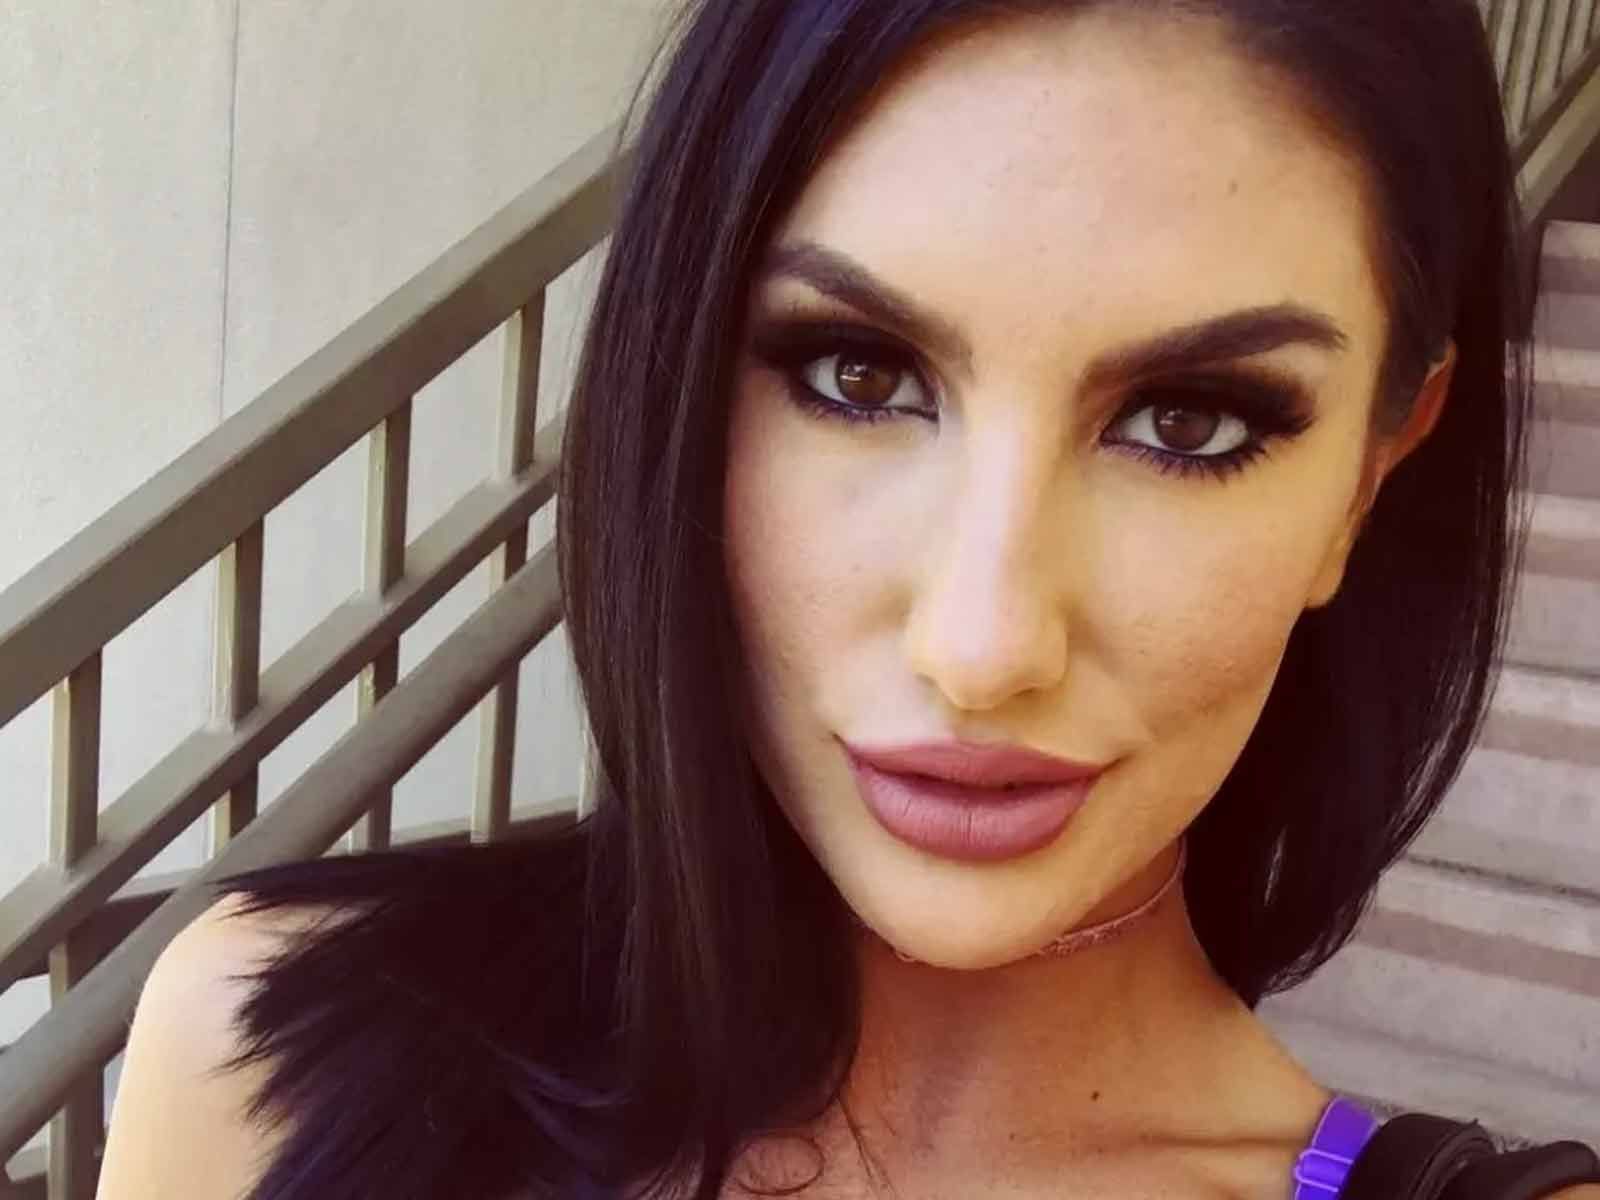 Pornstar August Ames Apologized To Family In Suicide Note Did Not Images, Photos, Reviews